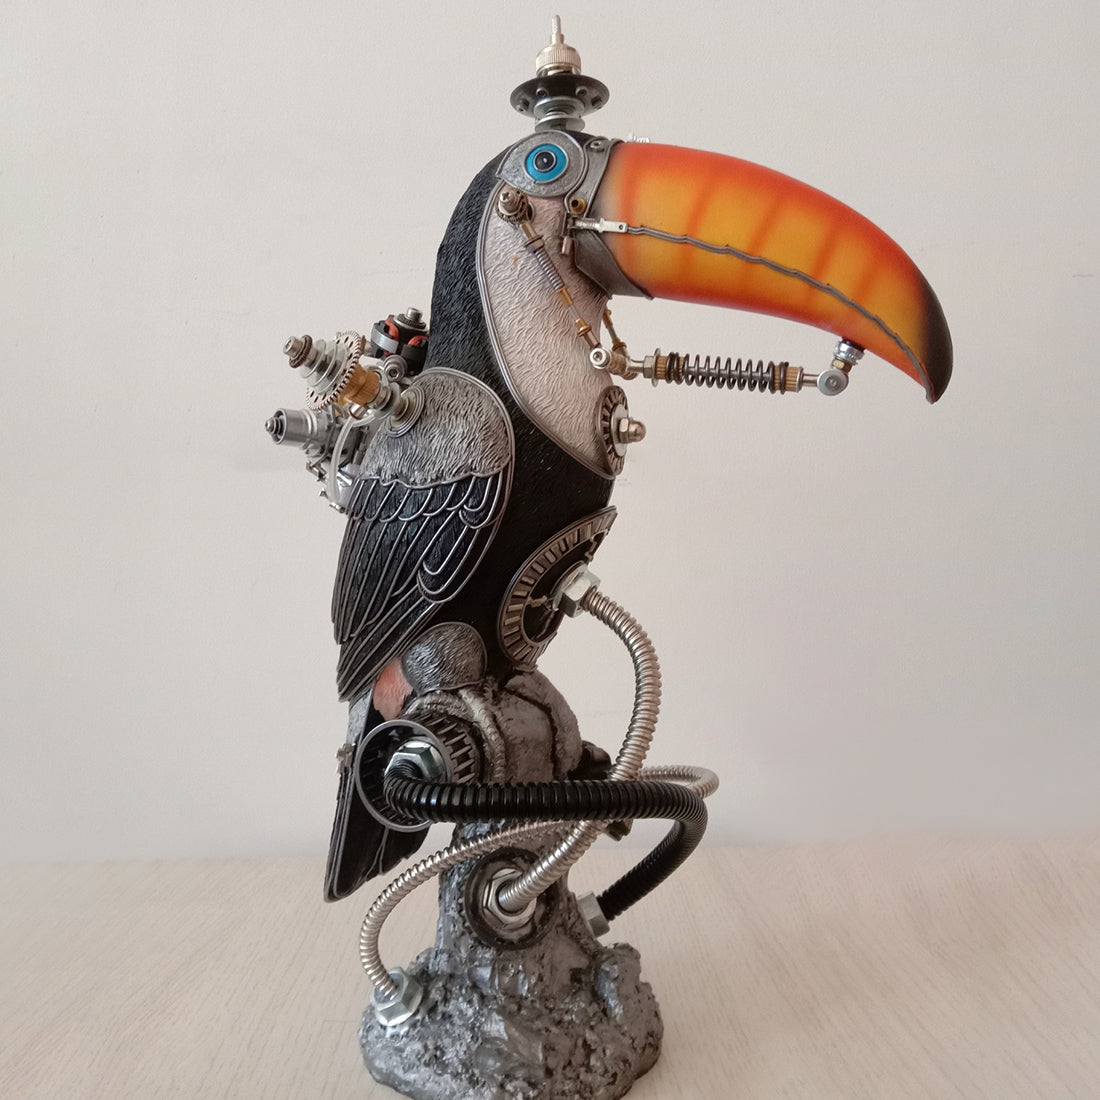 Steampunk Style Mechanical Metal Toco Toucan Bird Sculpture  Assembled Model Kits for Home Collection